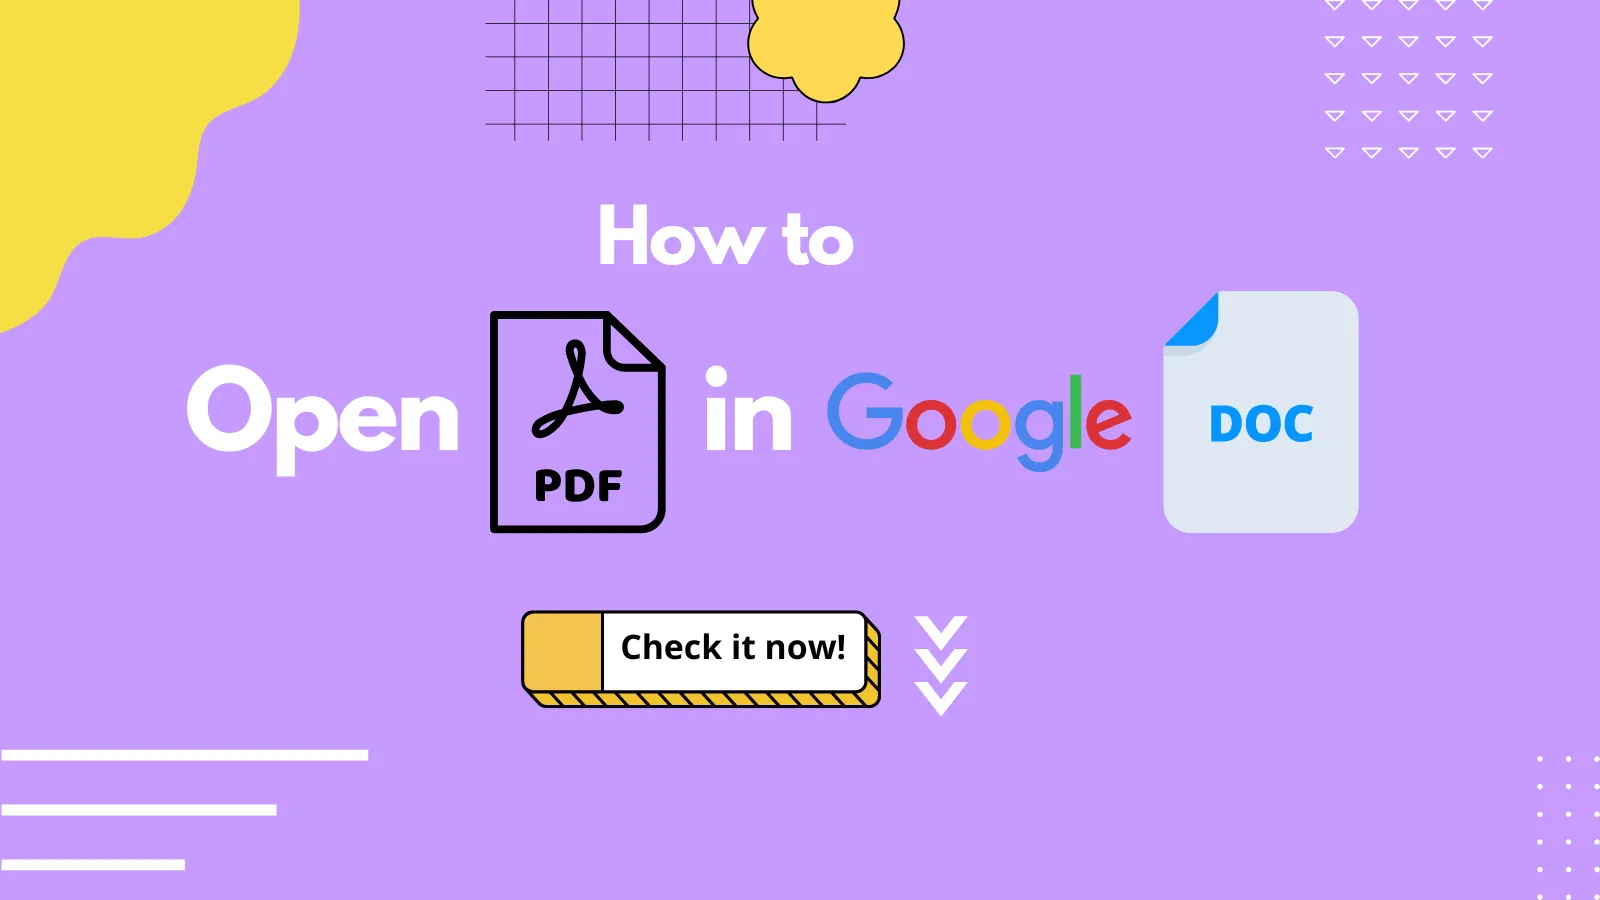 How to Open PDF in Google Docs